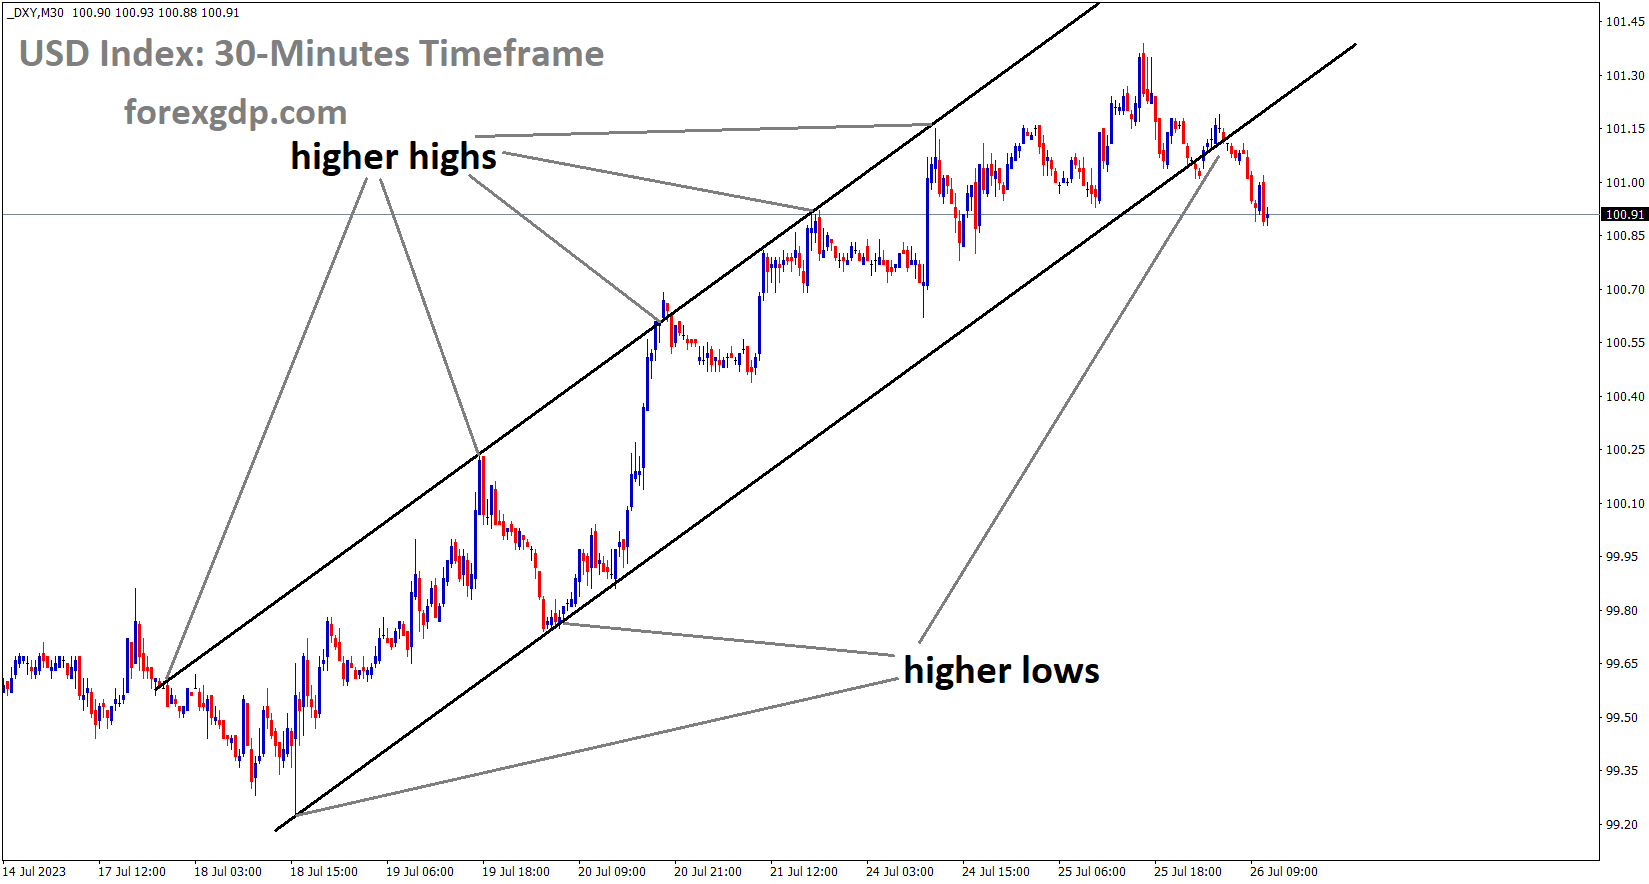 DXY US Dollar index is moving in an Ascending channel and the market has reached the higher low area of the channel